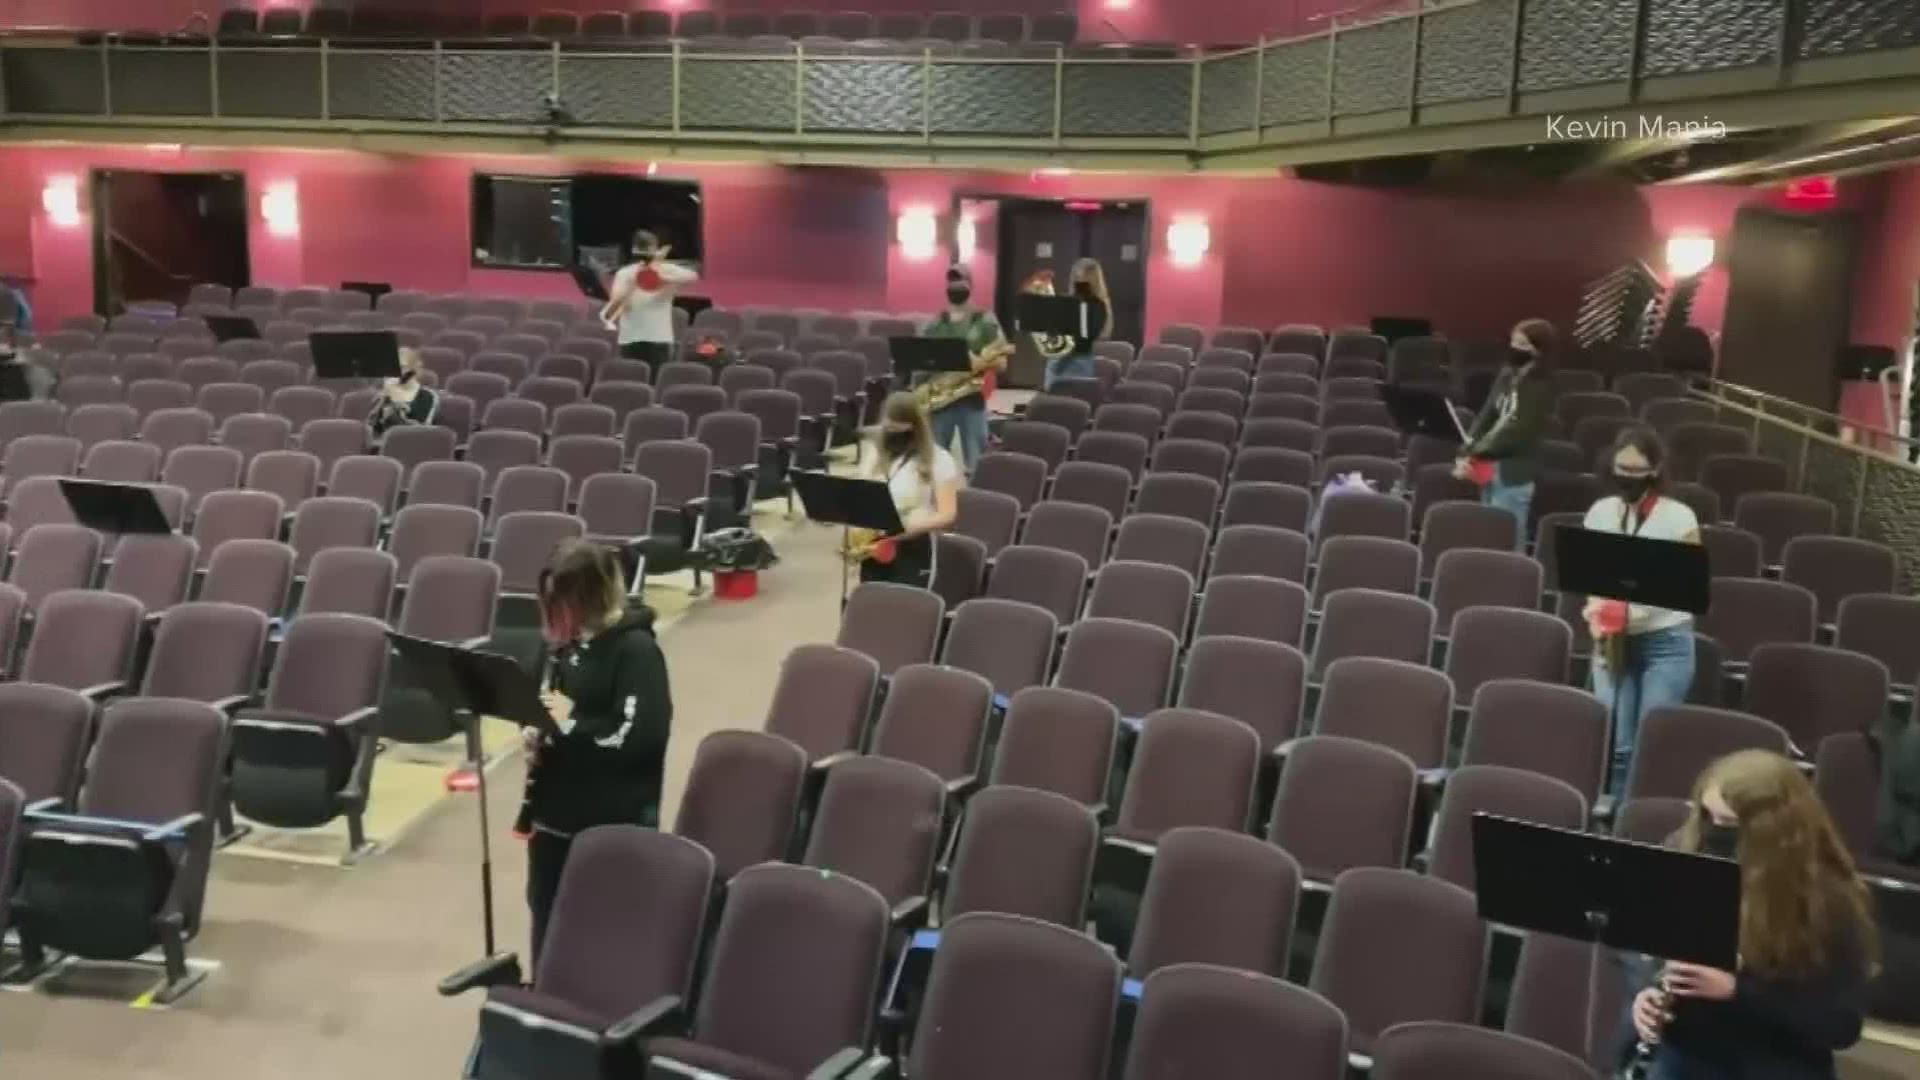 The president of the Maine Music Educators Association says scheduling and facility restrictions at some Maine schools have made indoor rehearsals challenging.